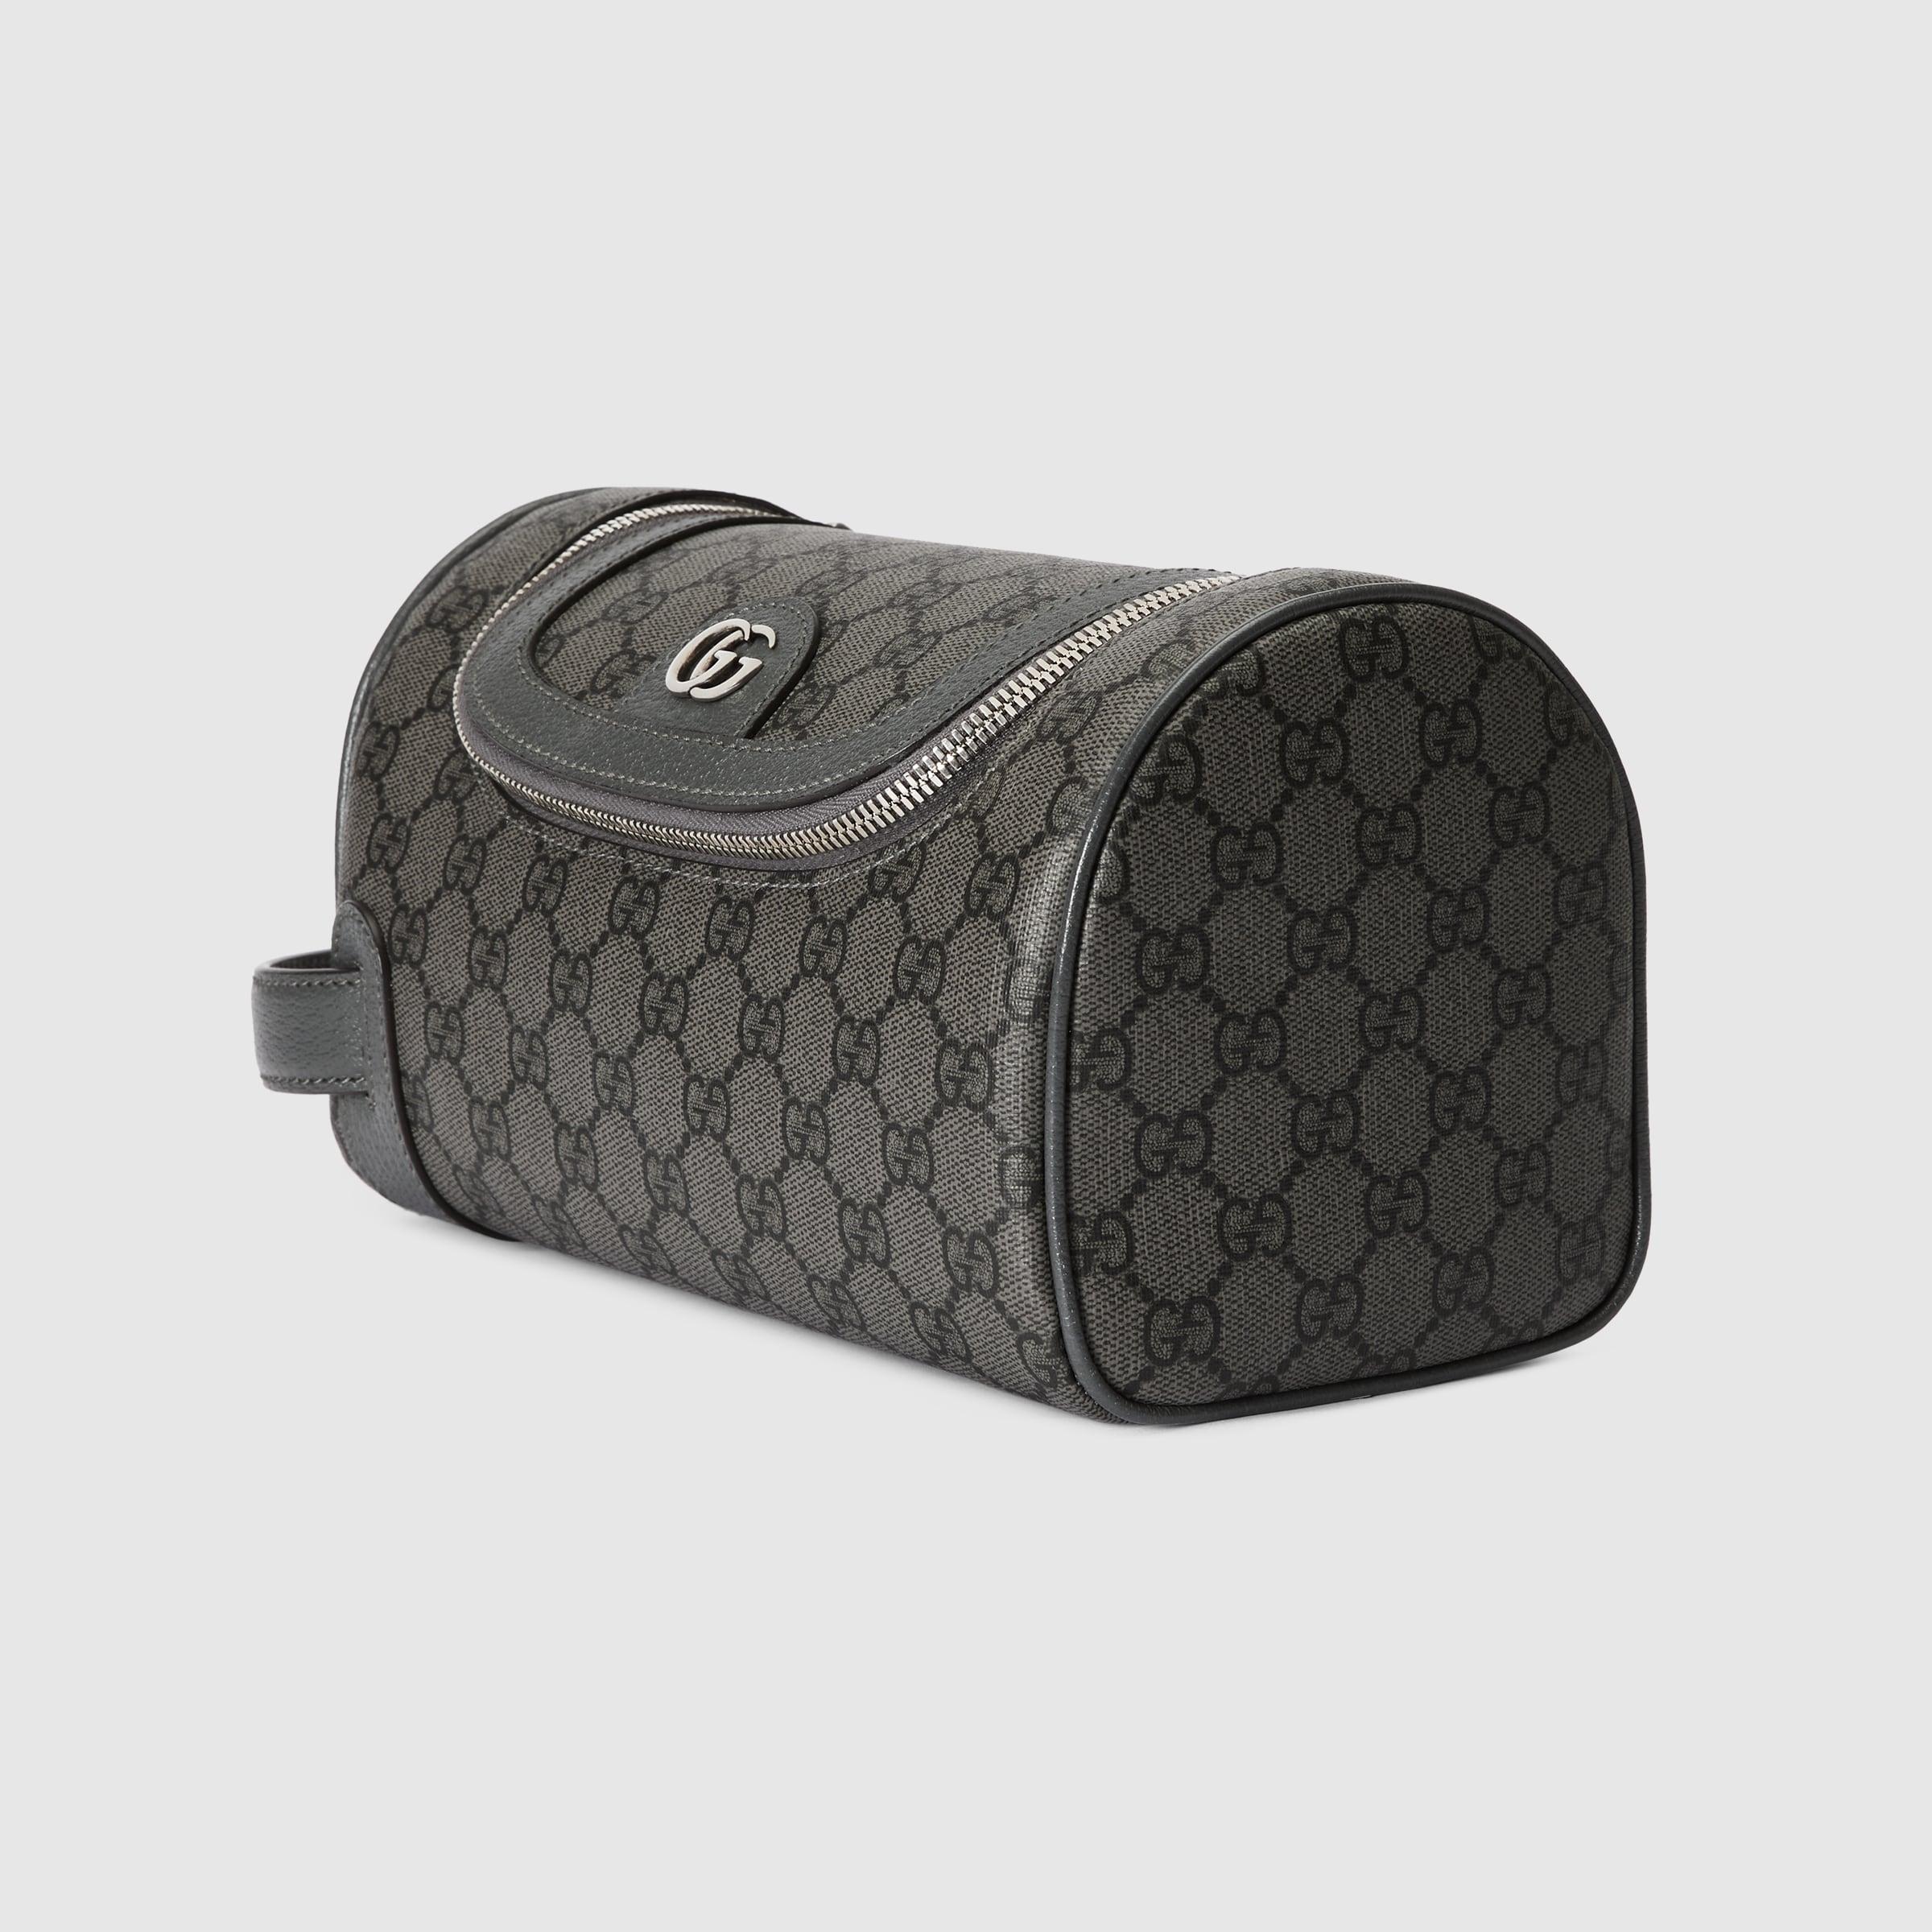 Ophidia toiletry case